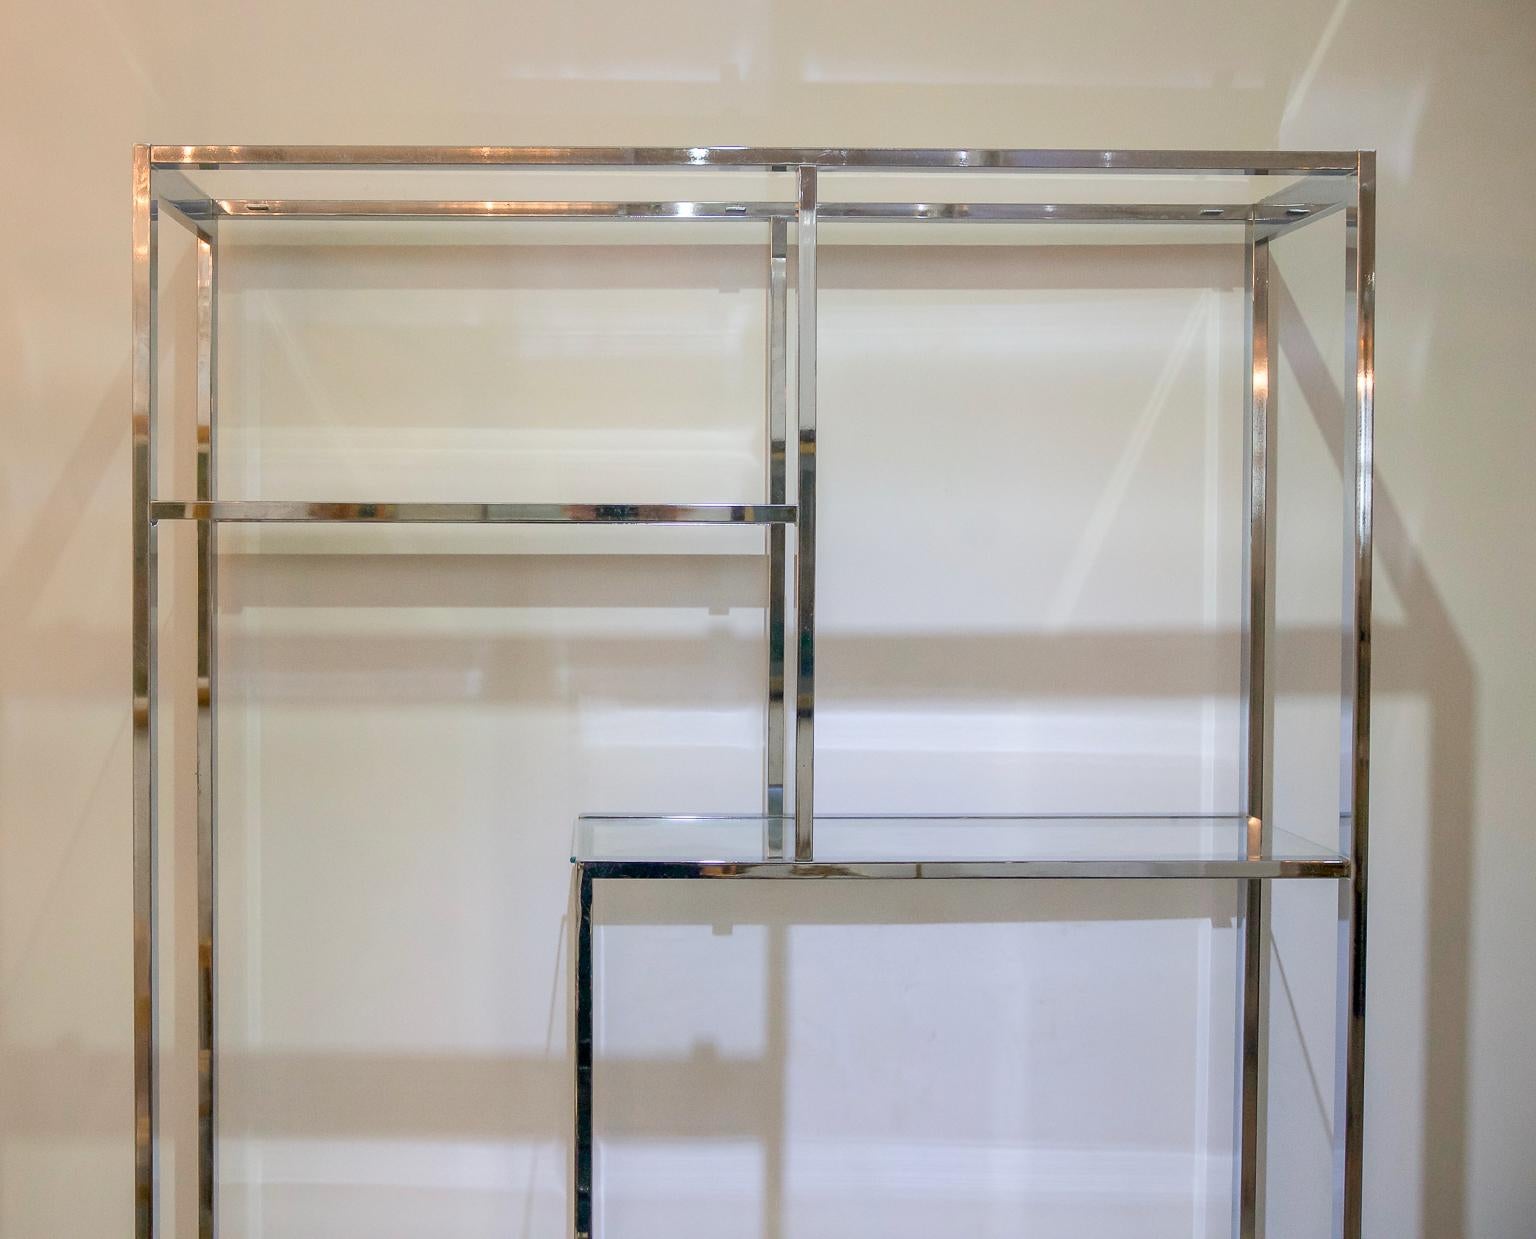 American Chrome and Glass Etagere, attributed to the Design Institute America